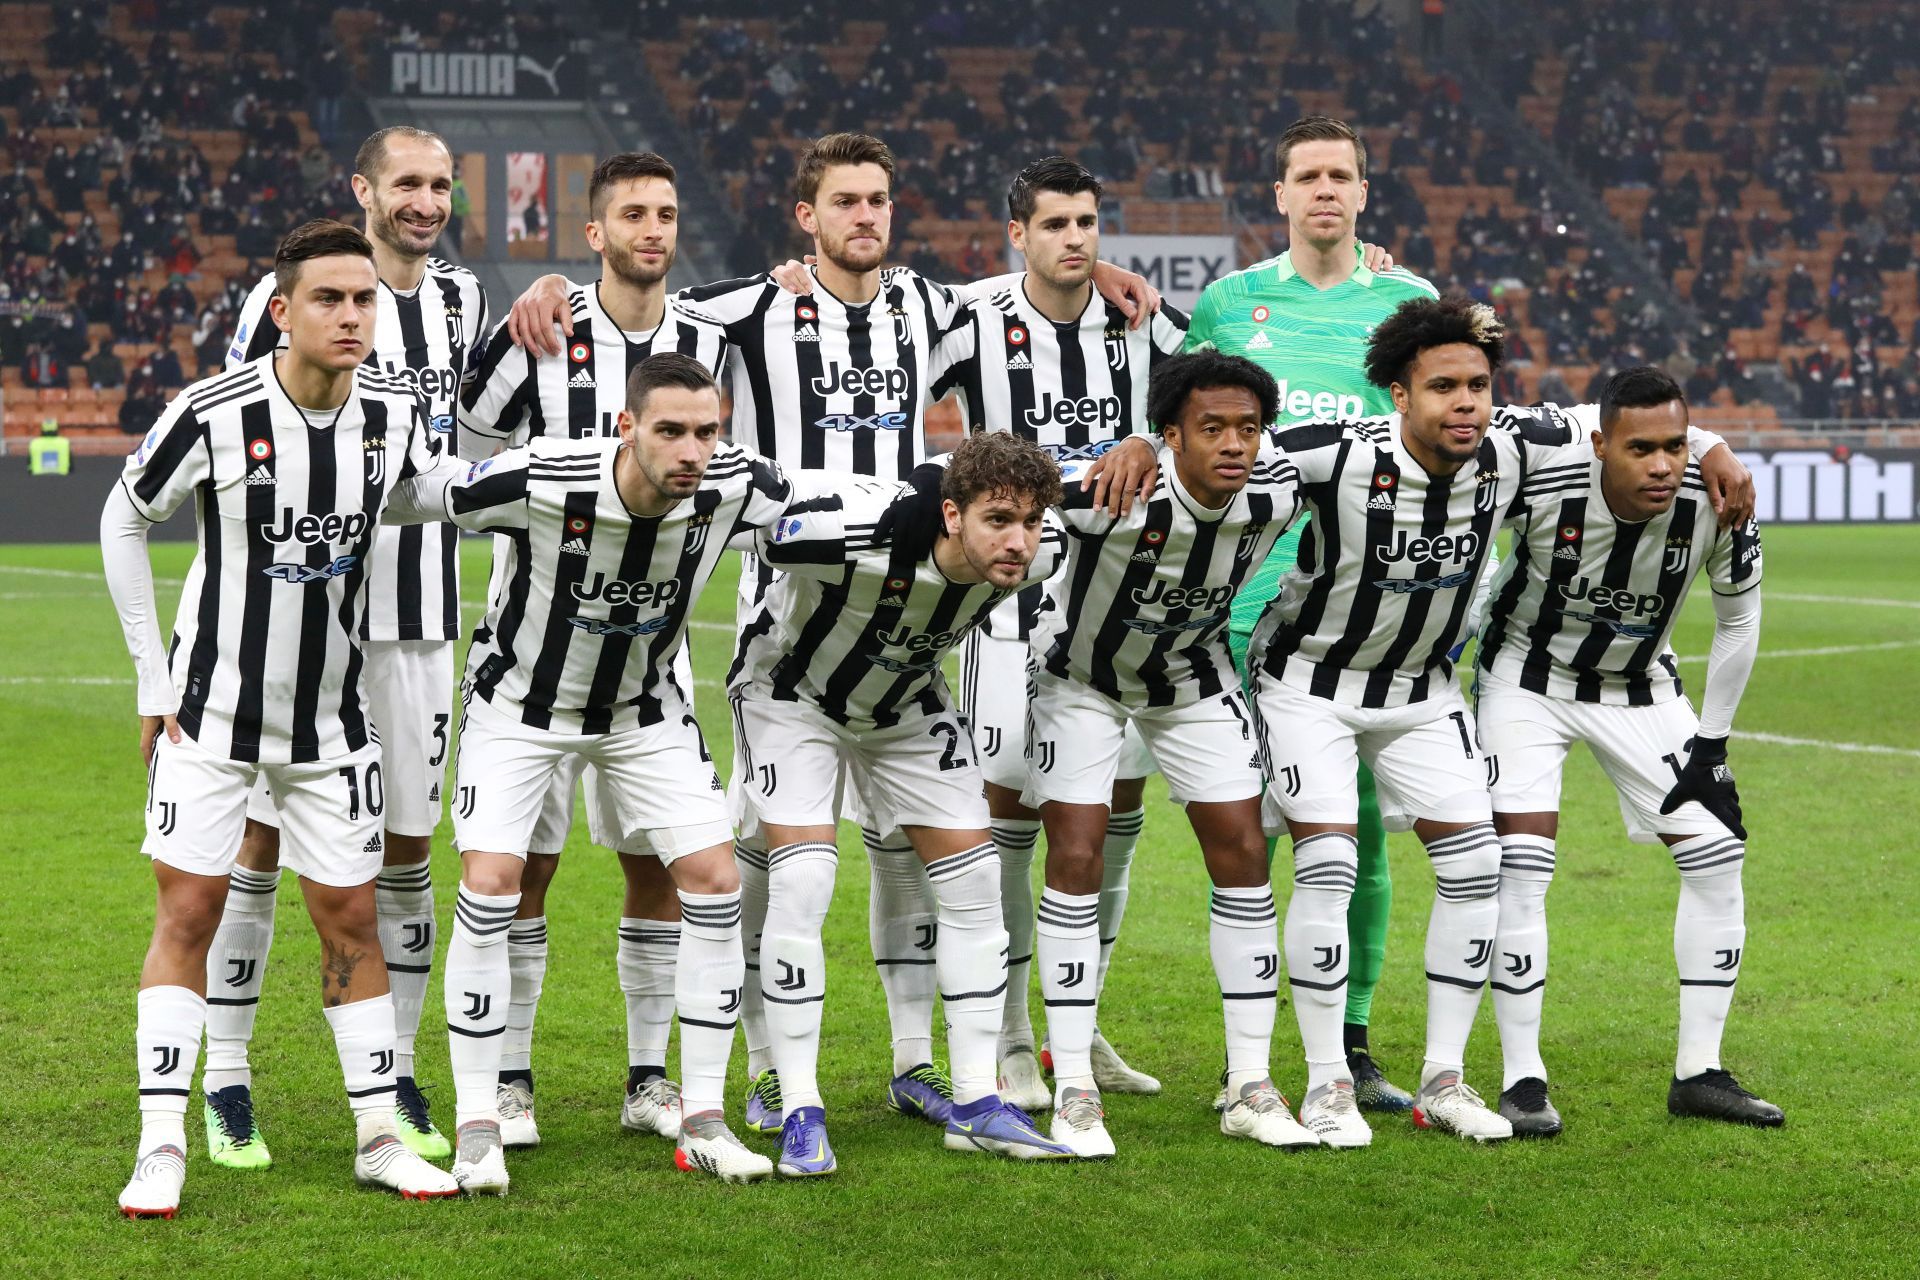  Juventus players pose for a team photo ahead of their game against AC Milan